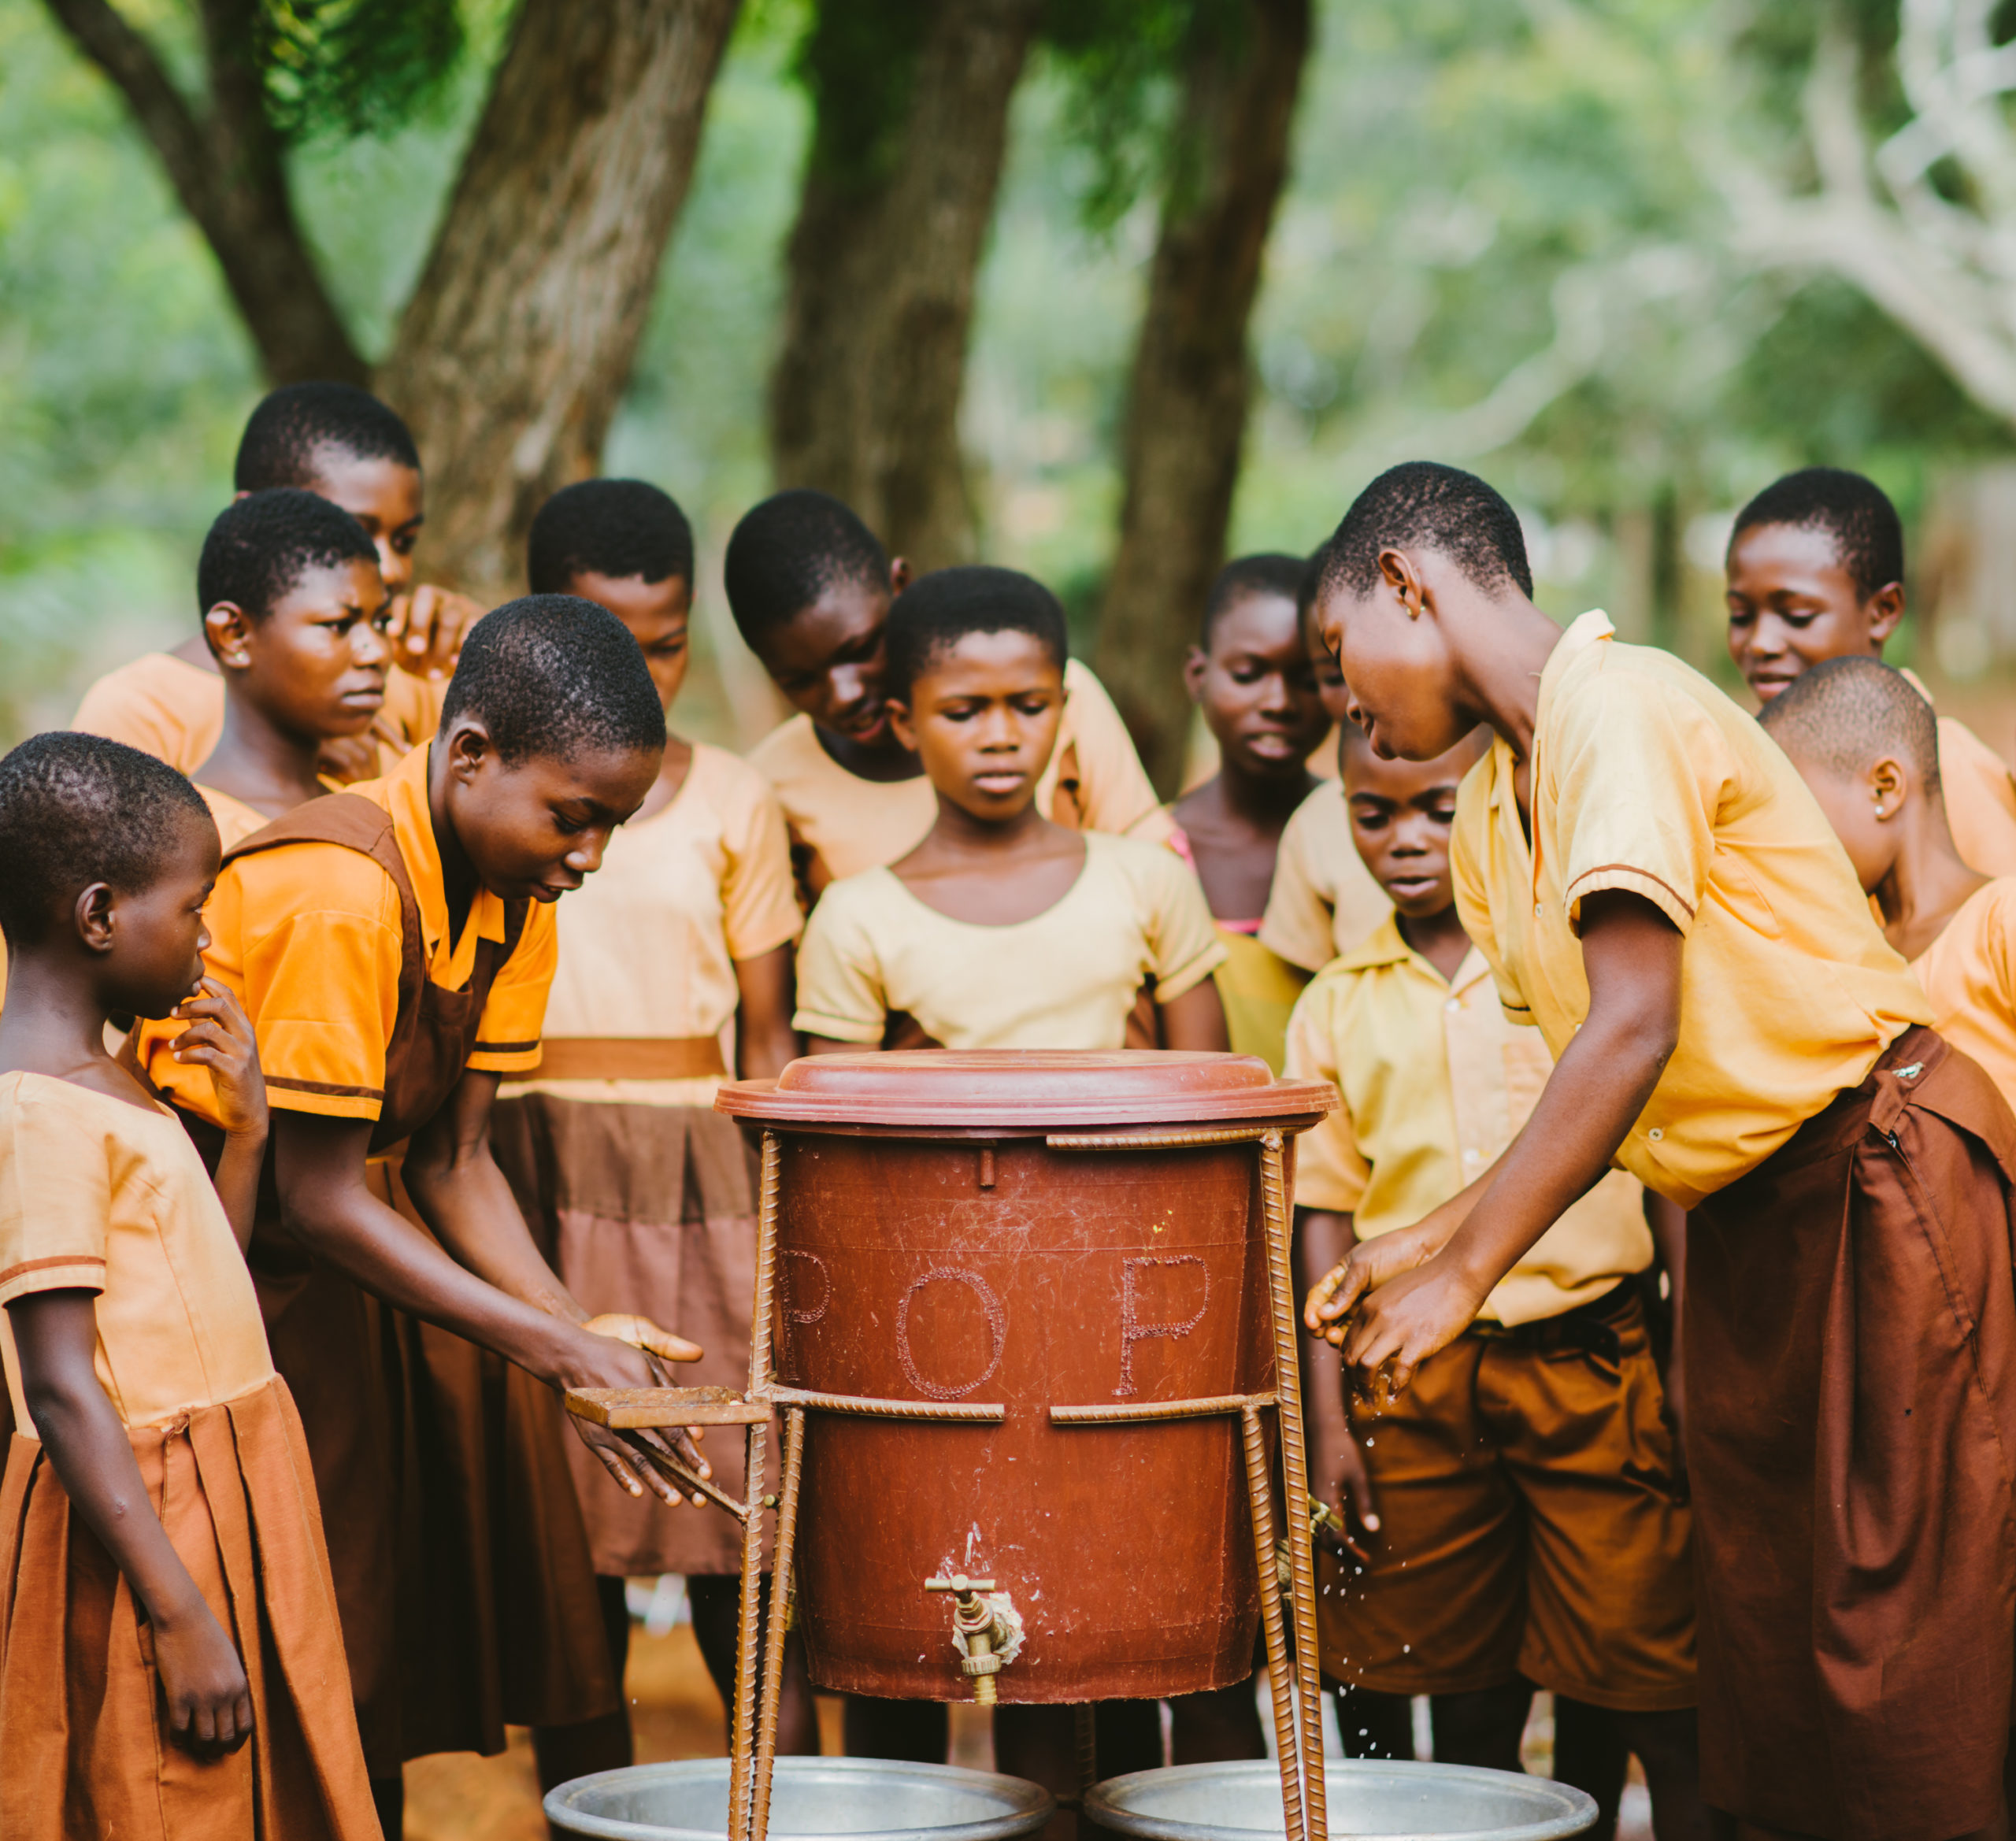 A group of students in Ghana gather around a handwashing station provided by PoP | Photo credit: Chi Chi Ari